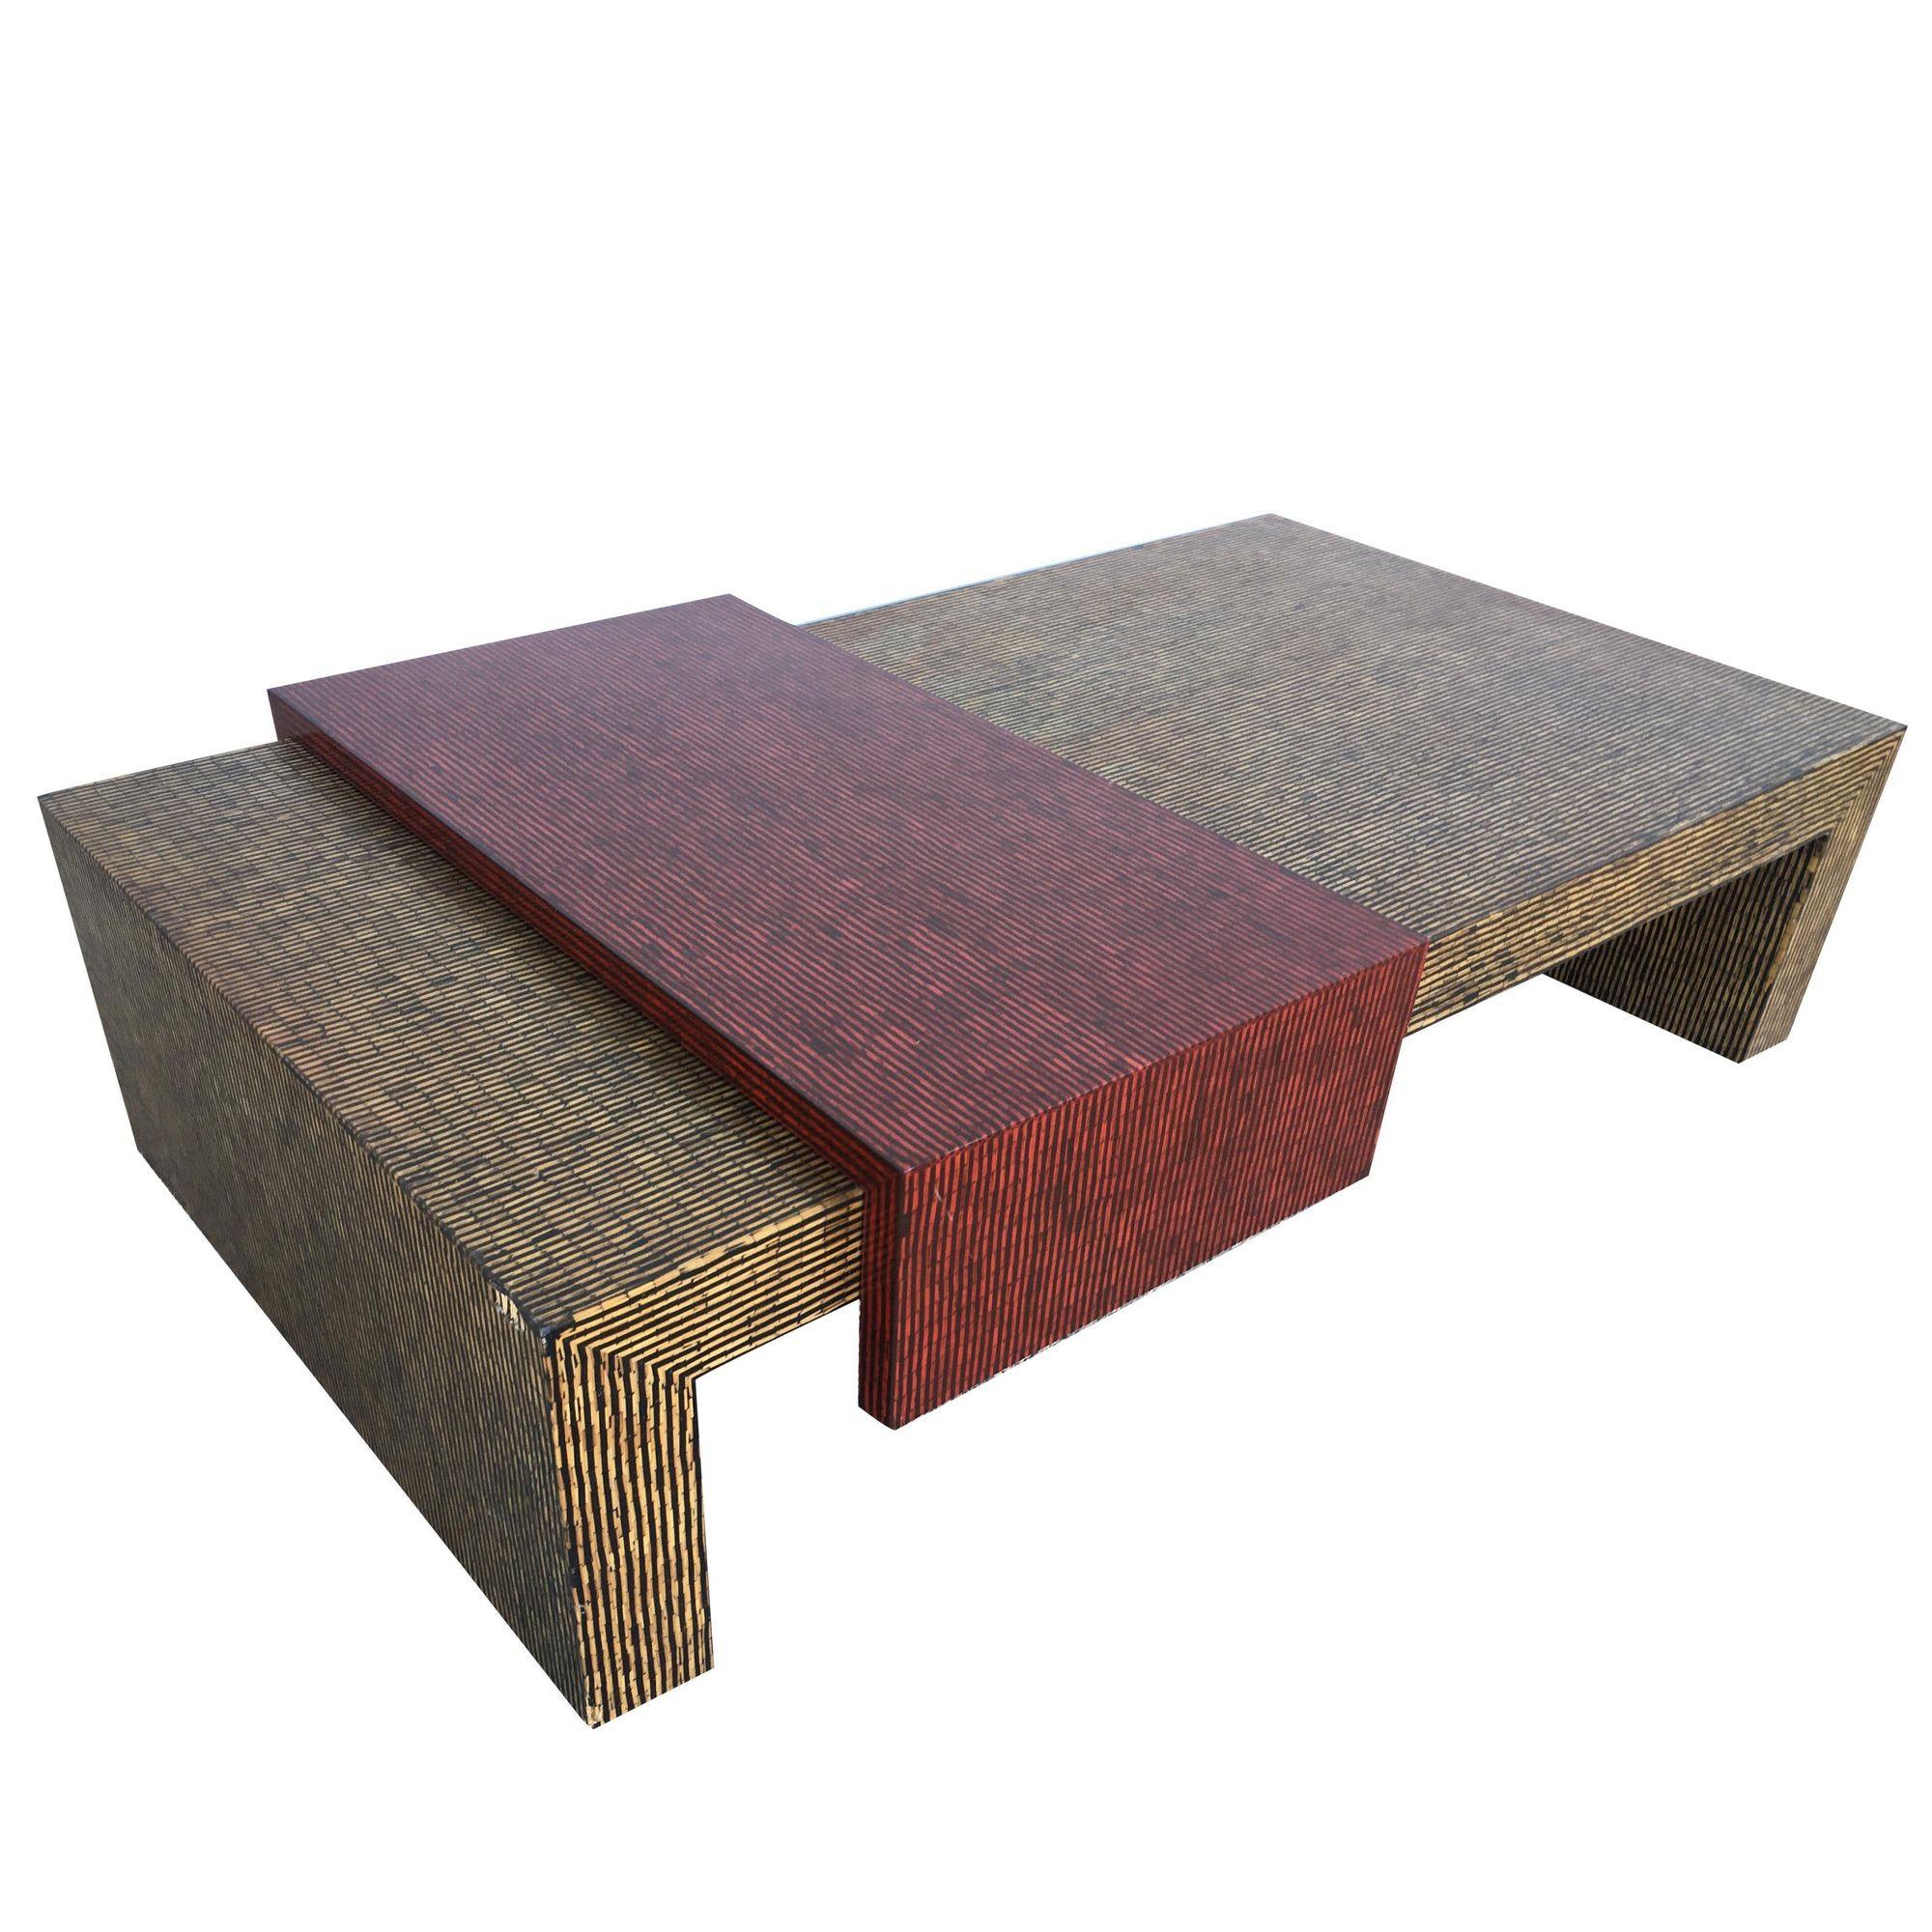 Two-tone Cubist Style side table and coffee table set with red and tan textured vinyl tops. Side Tables- H 22.5 in. x W 22 in. x D 19 in. Coffee Table- H 13.5 in. x W 50.5 in. x D 30.5 in.